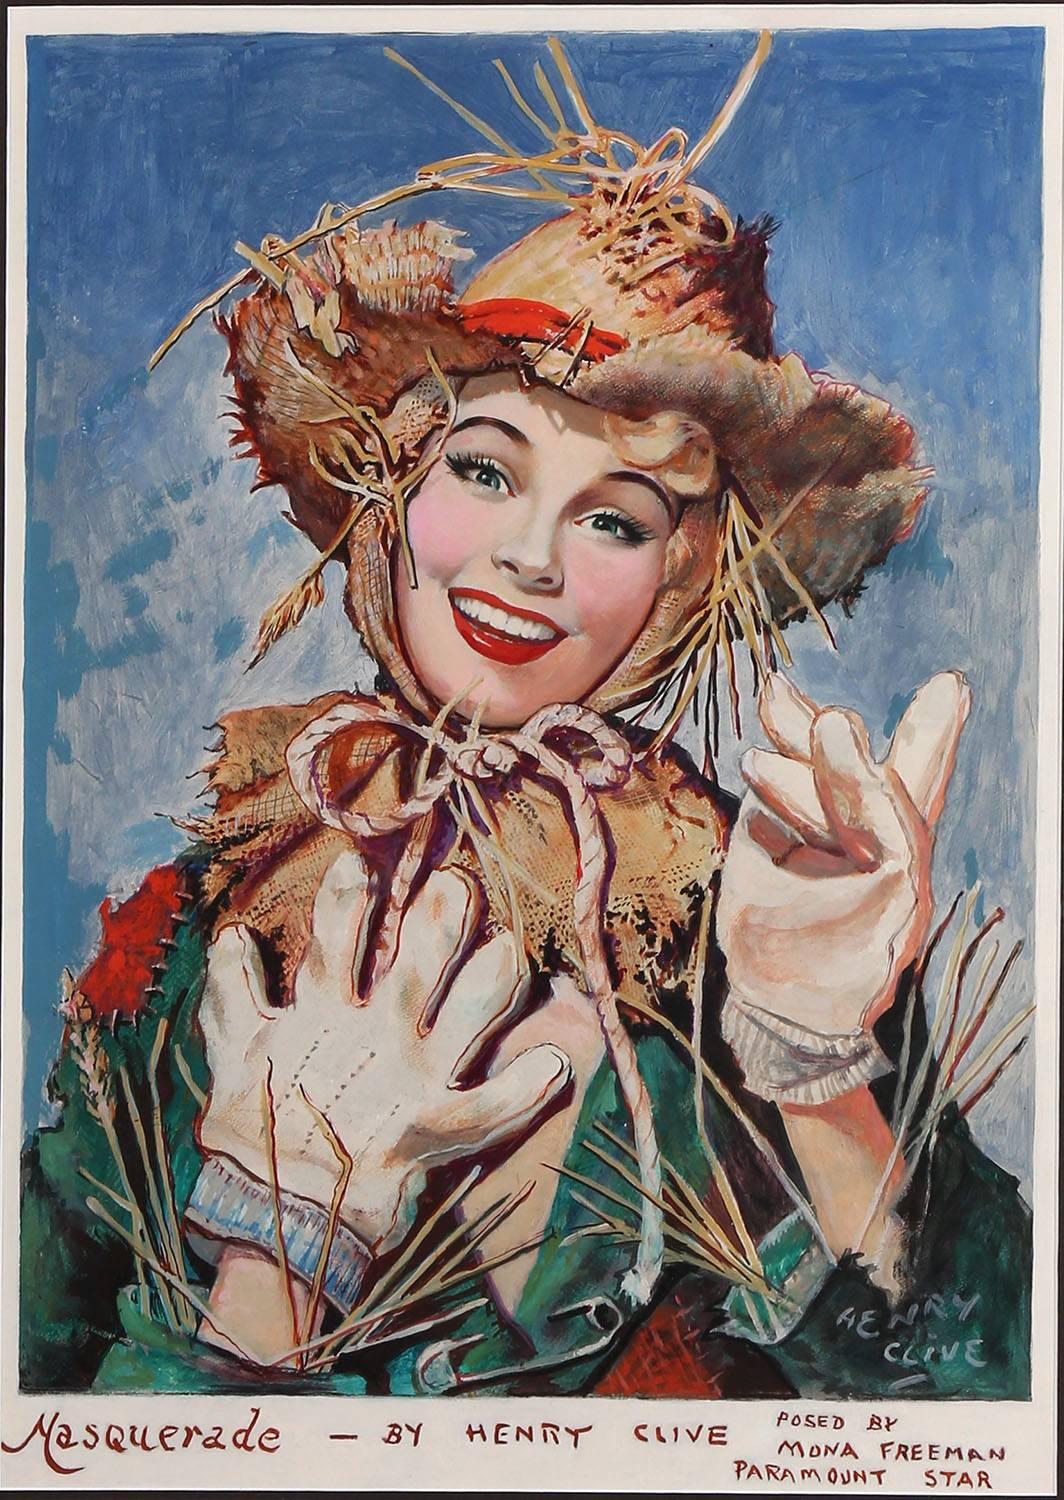 Masquarade - A Scarecrow - Painting by Henry Clive